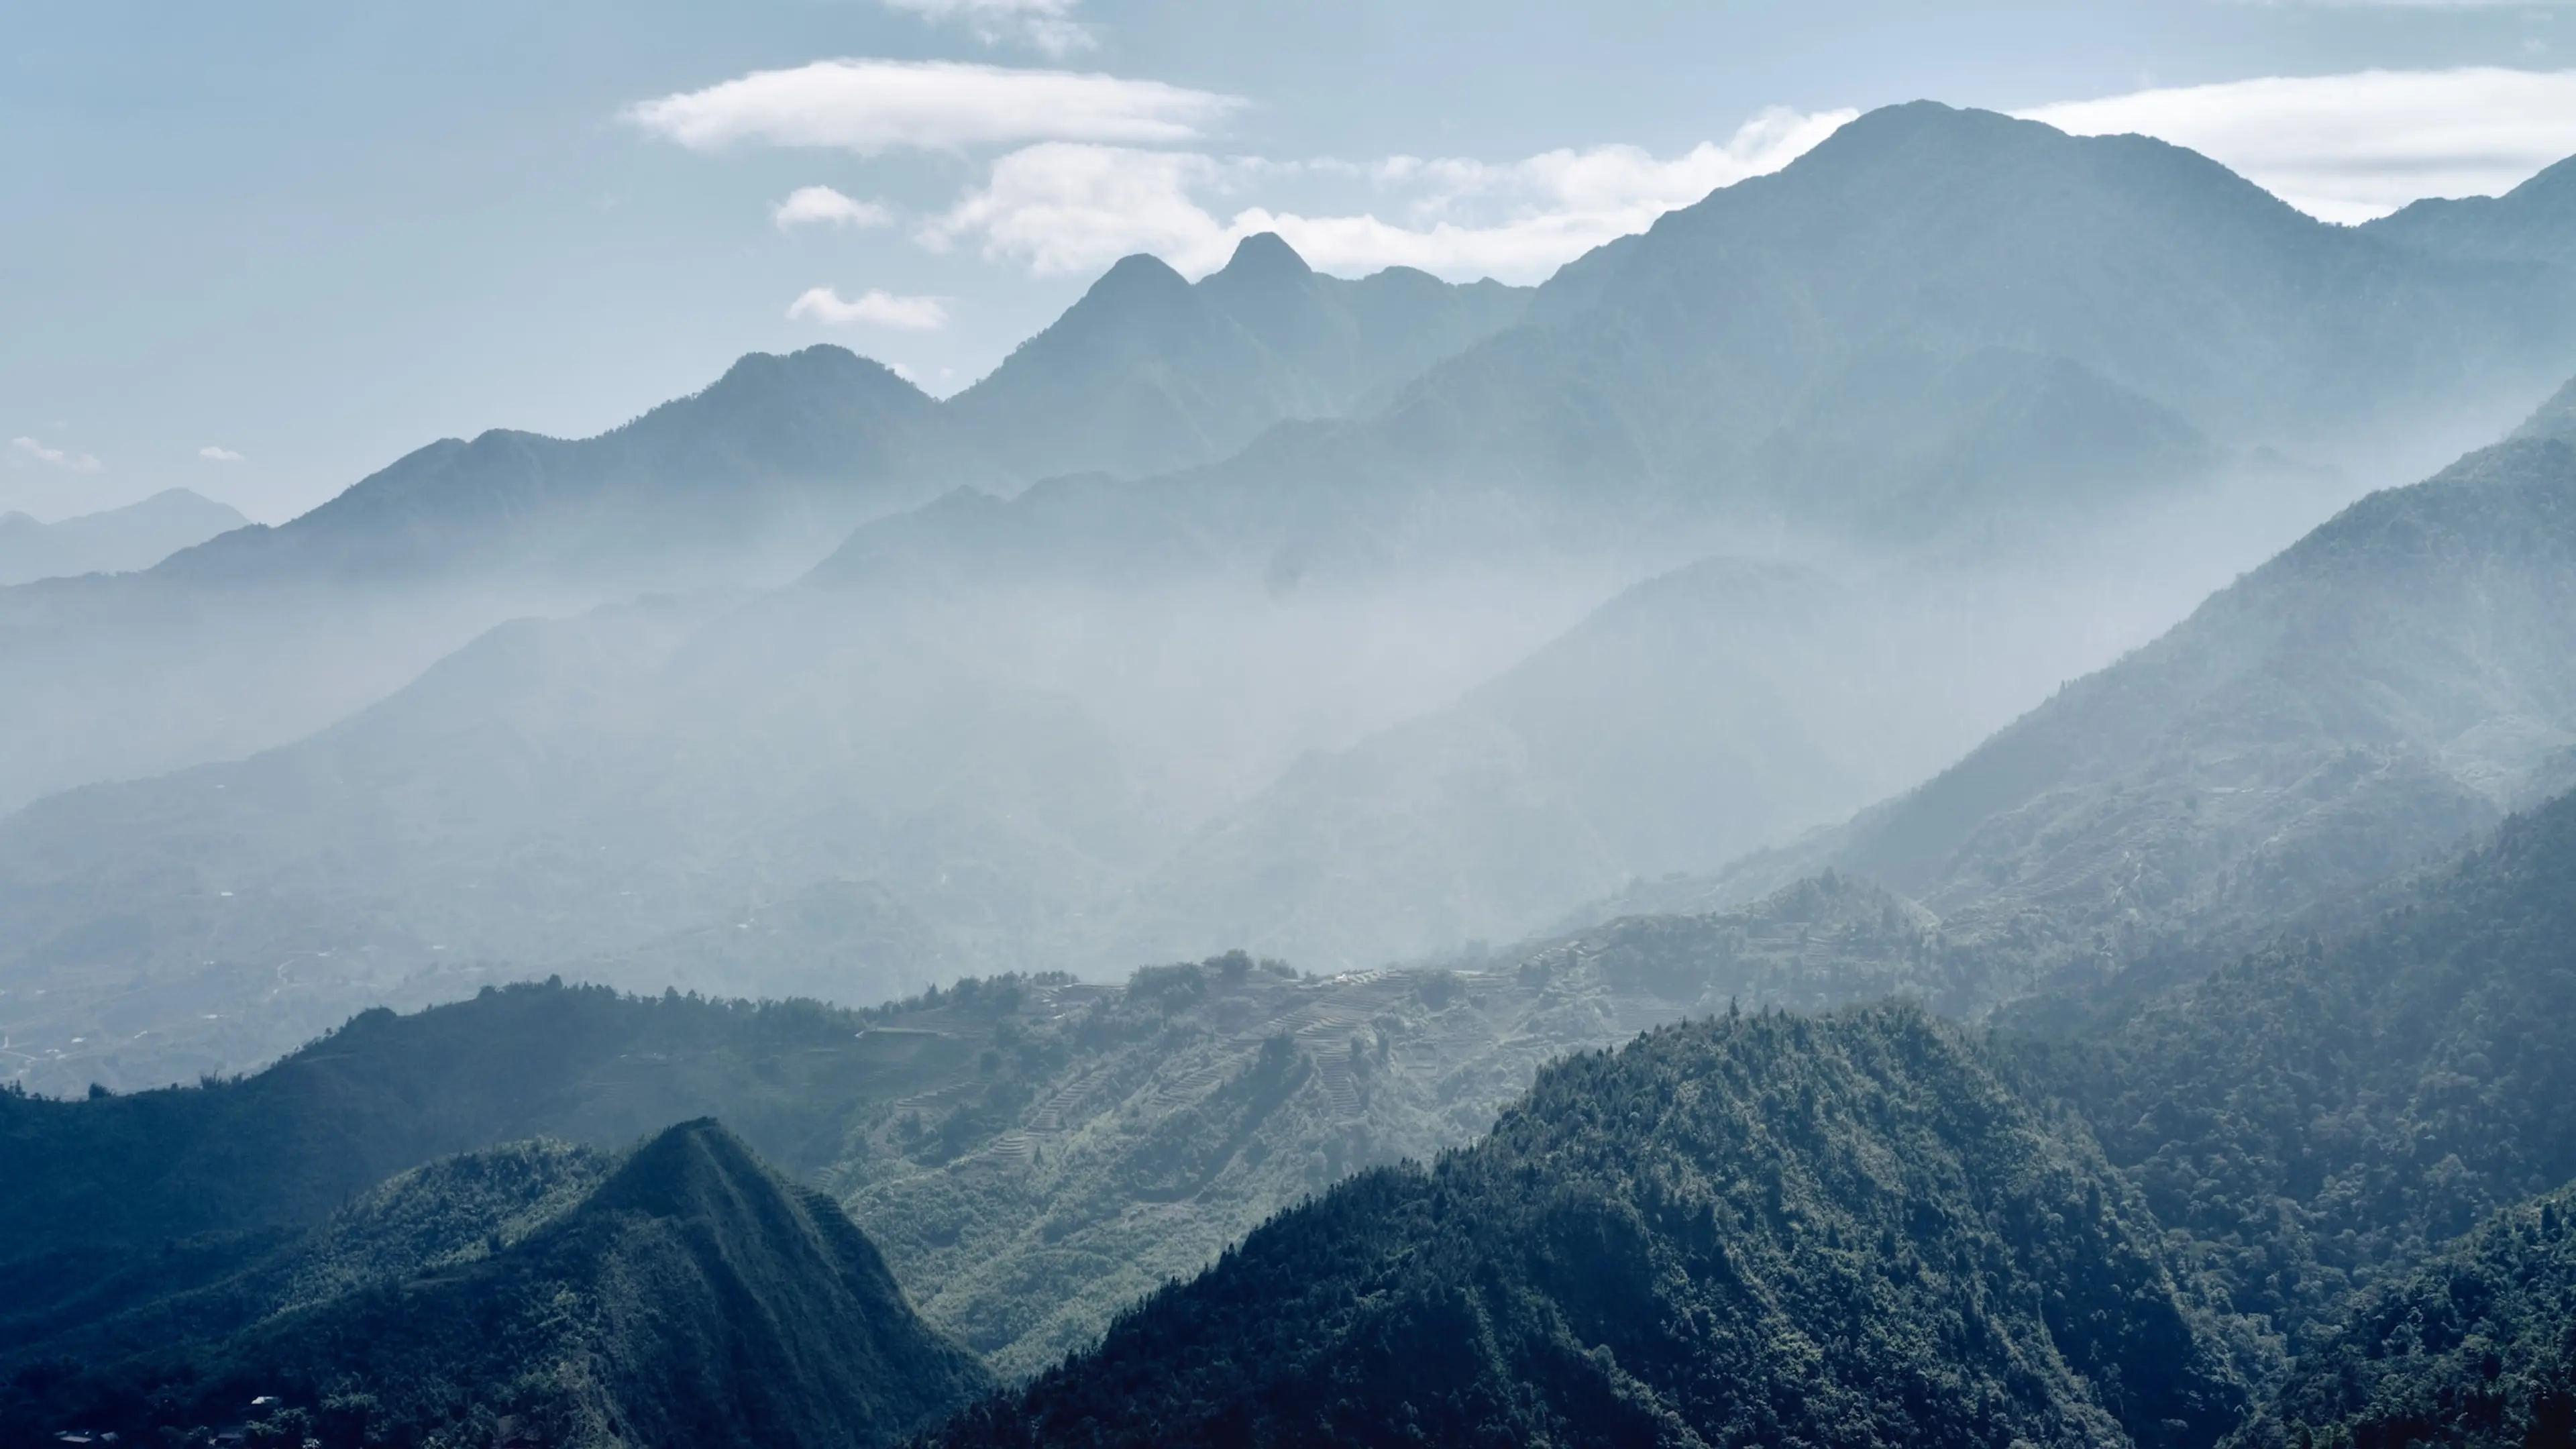 The mountain of Northern Vietnam